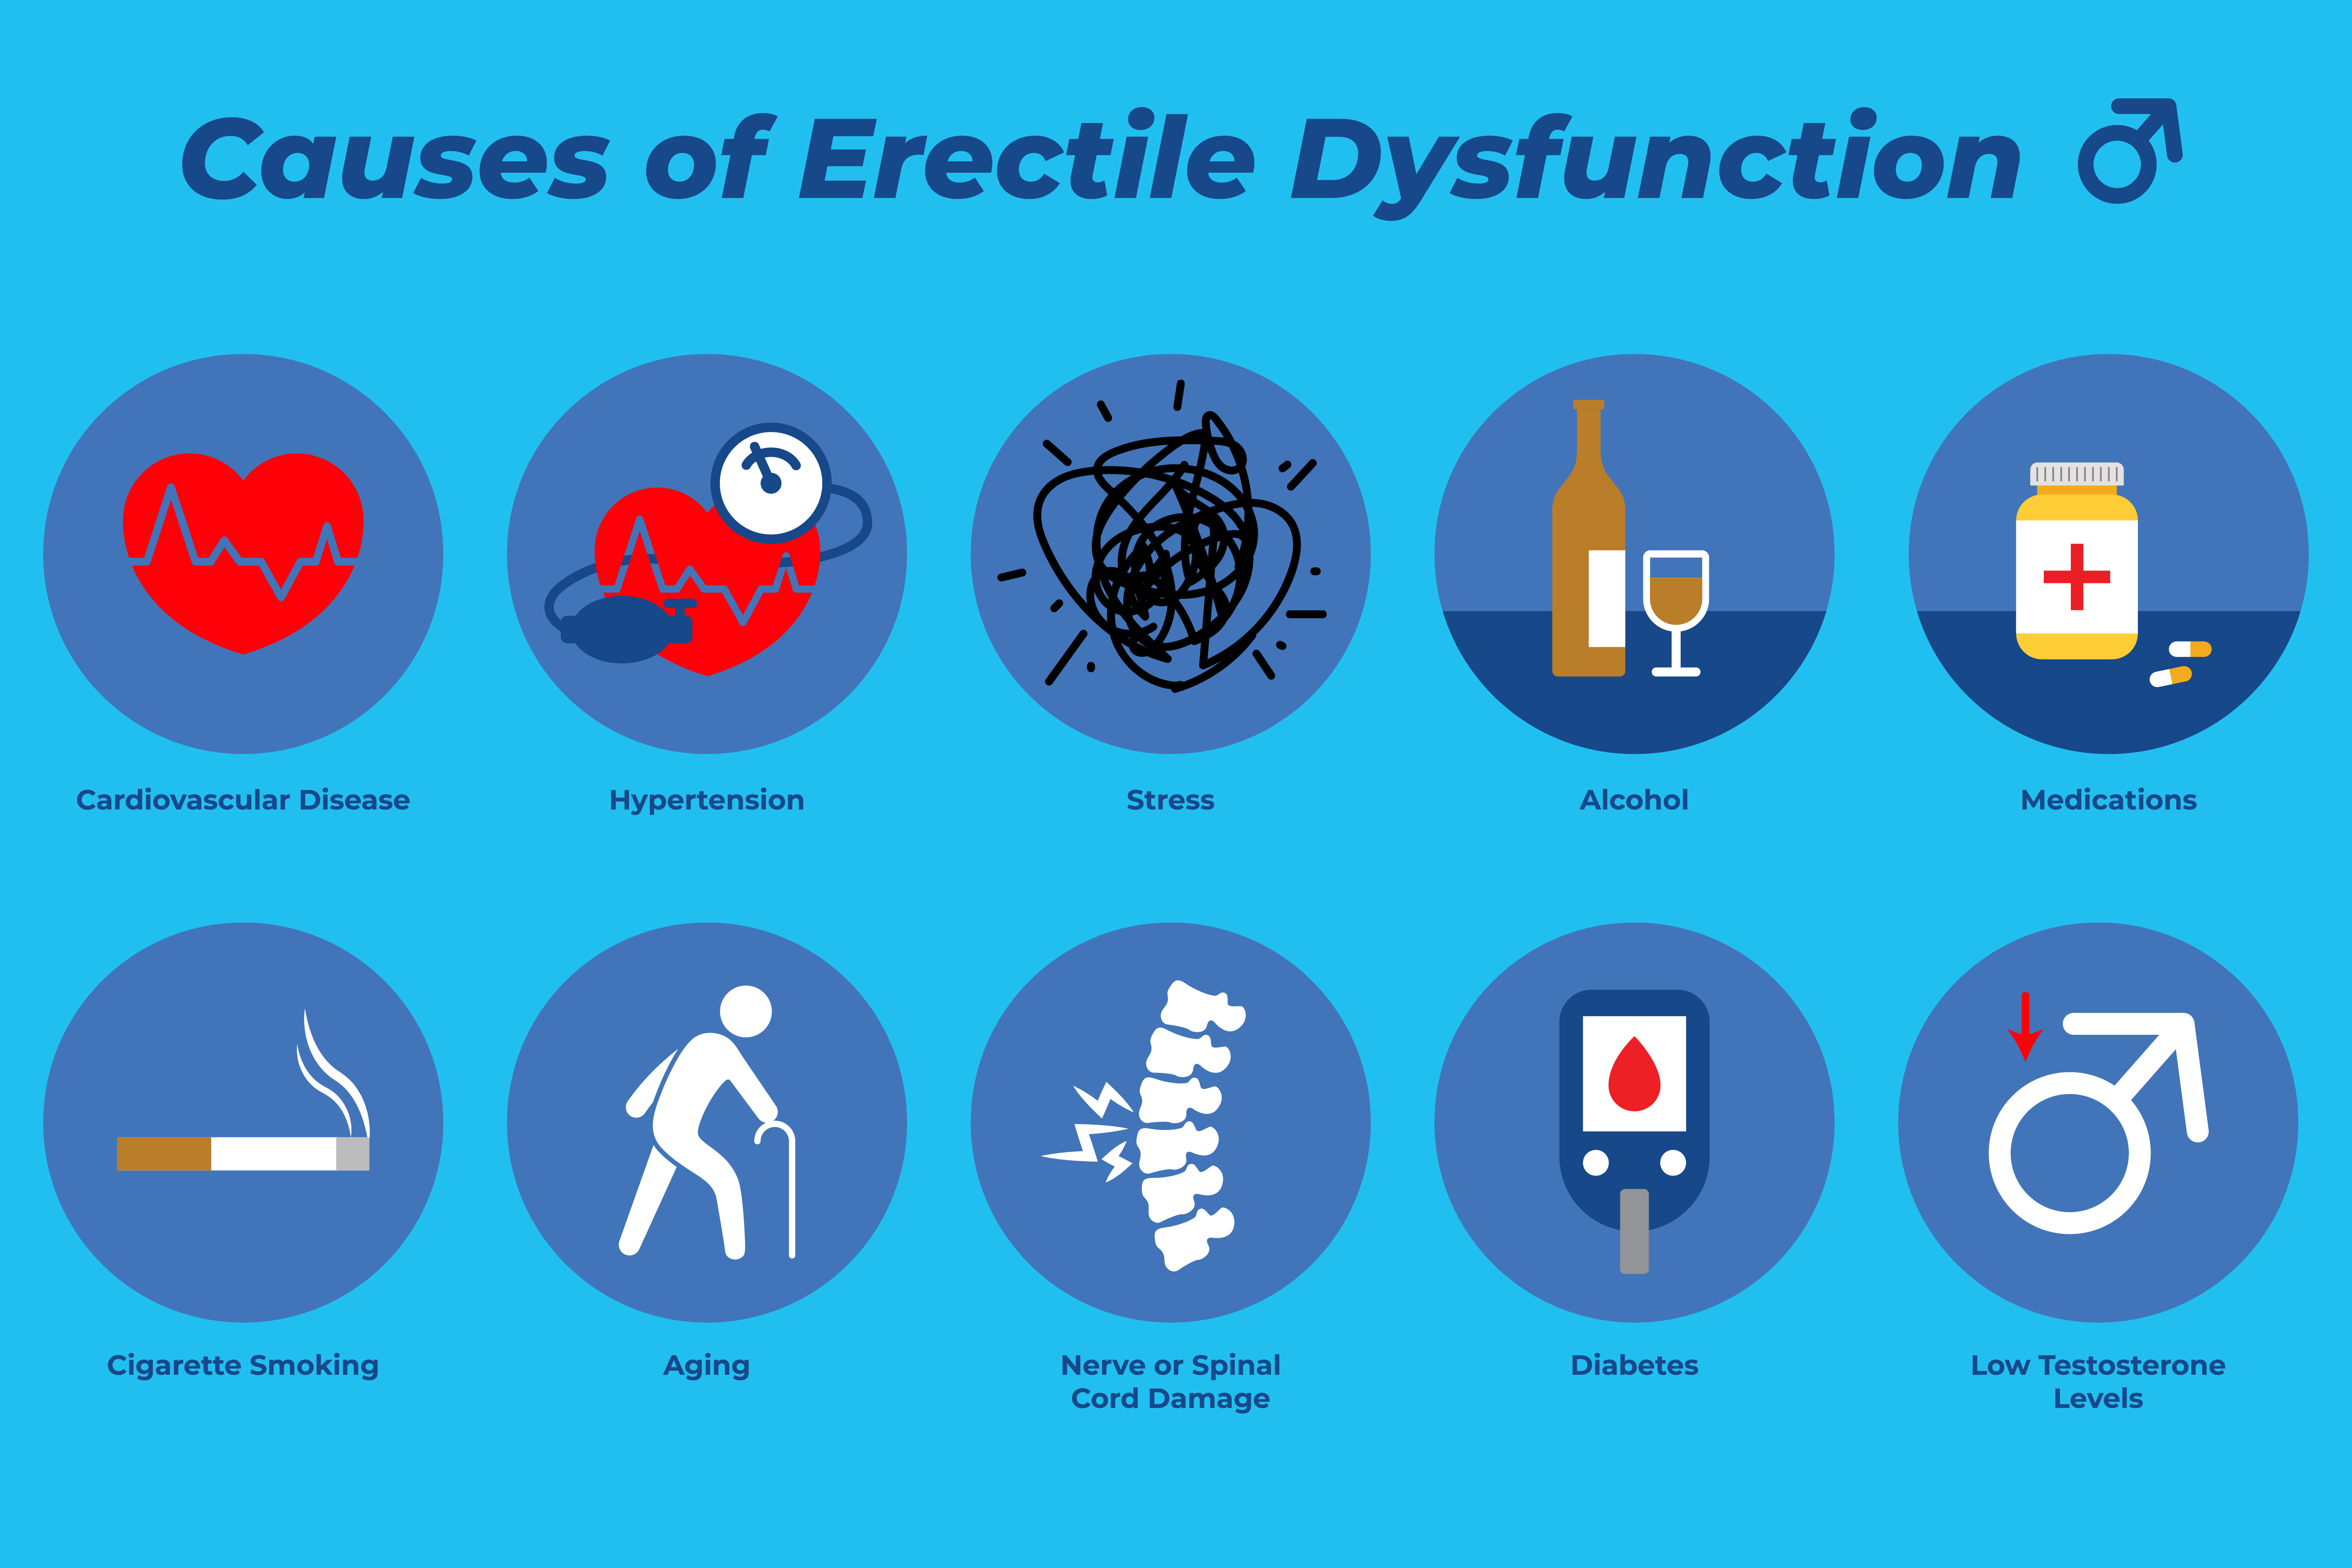 Common causes of erectile dysfunction